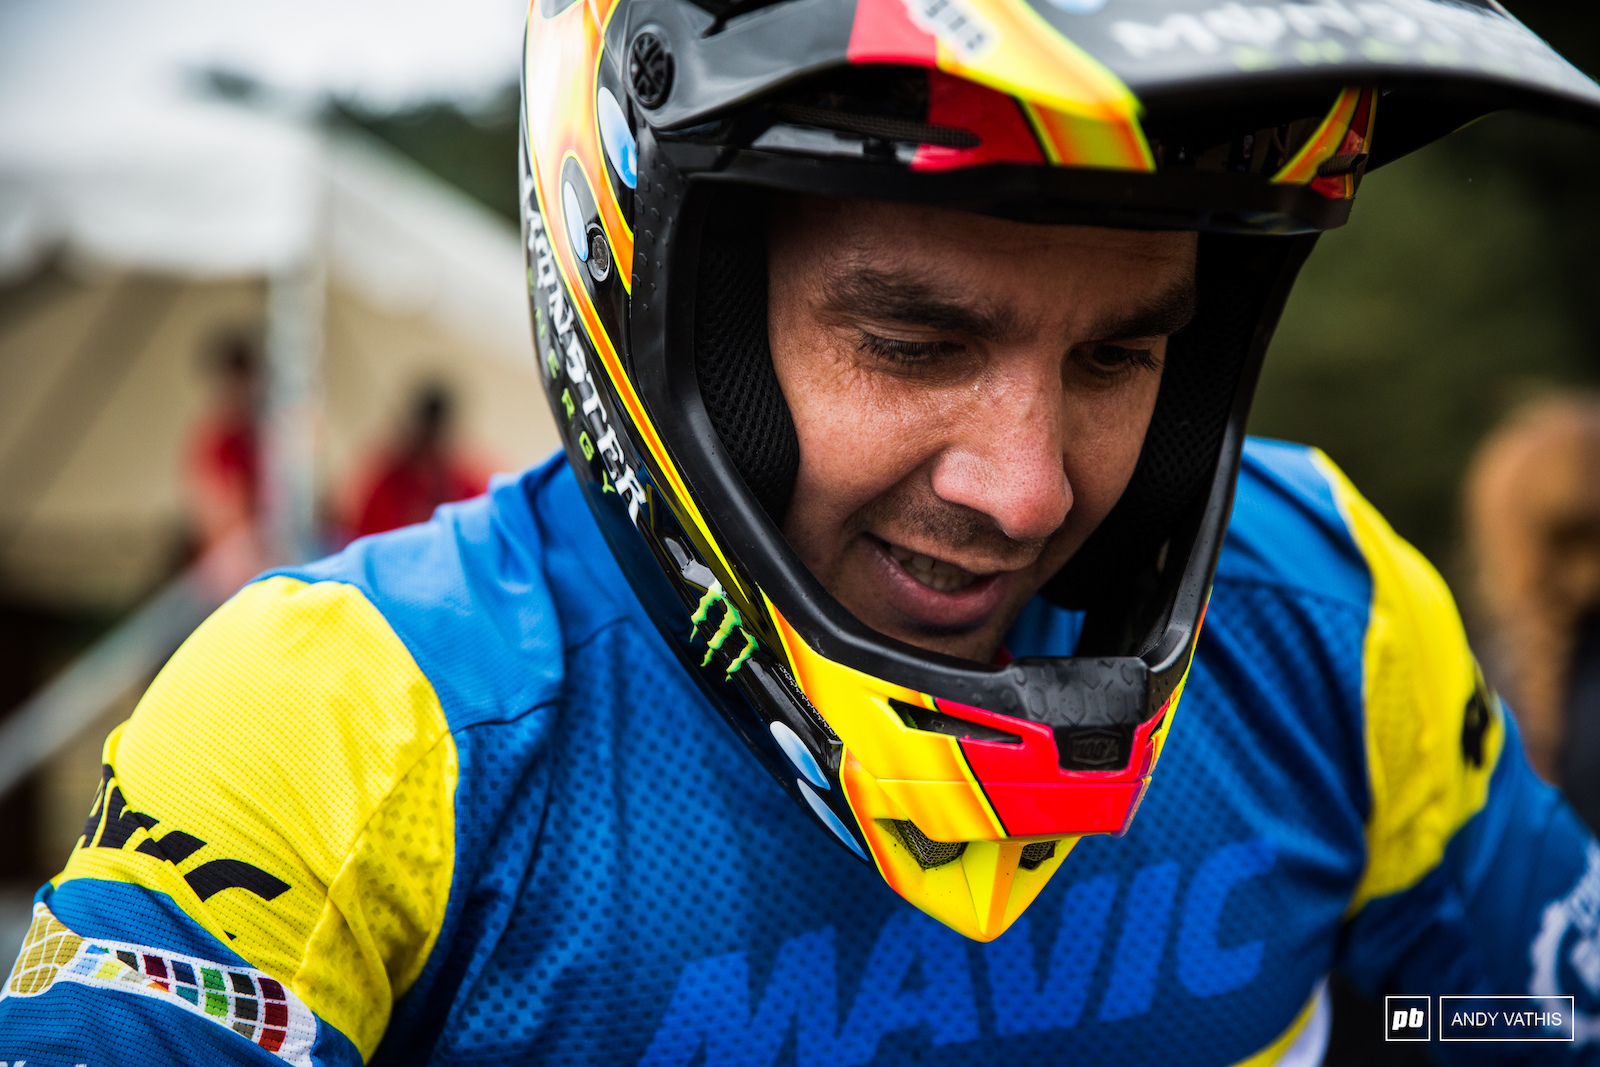 Sam Hill's day started off well until a mechanical slowed him down.